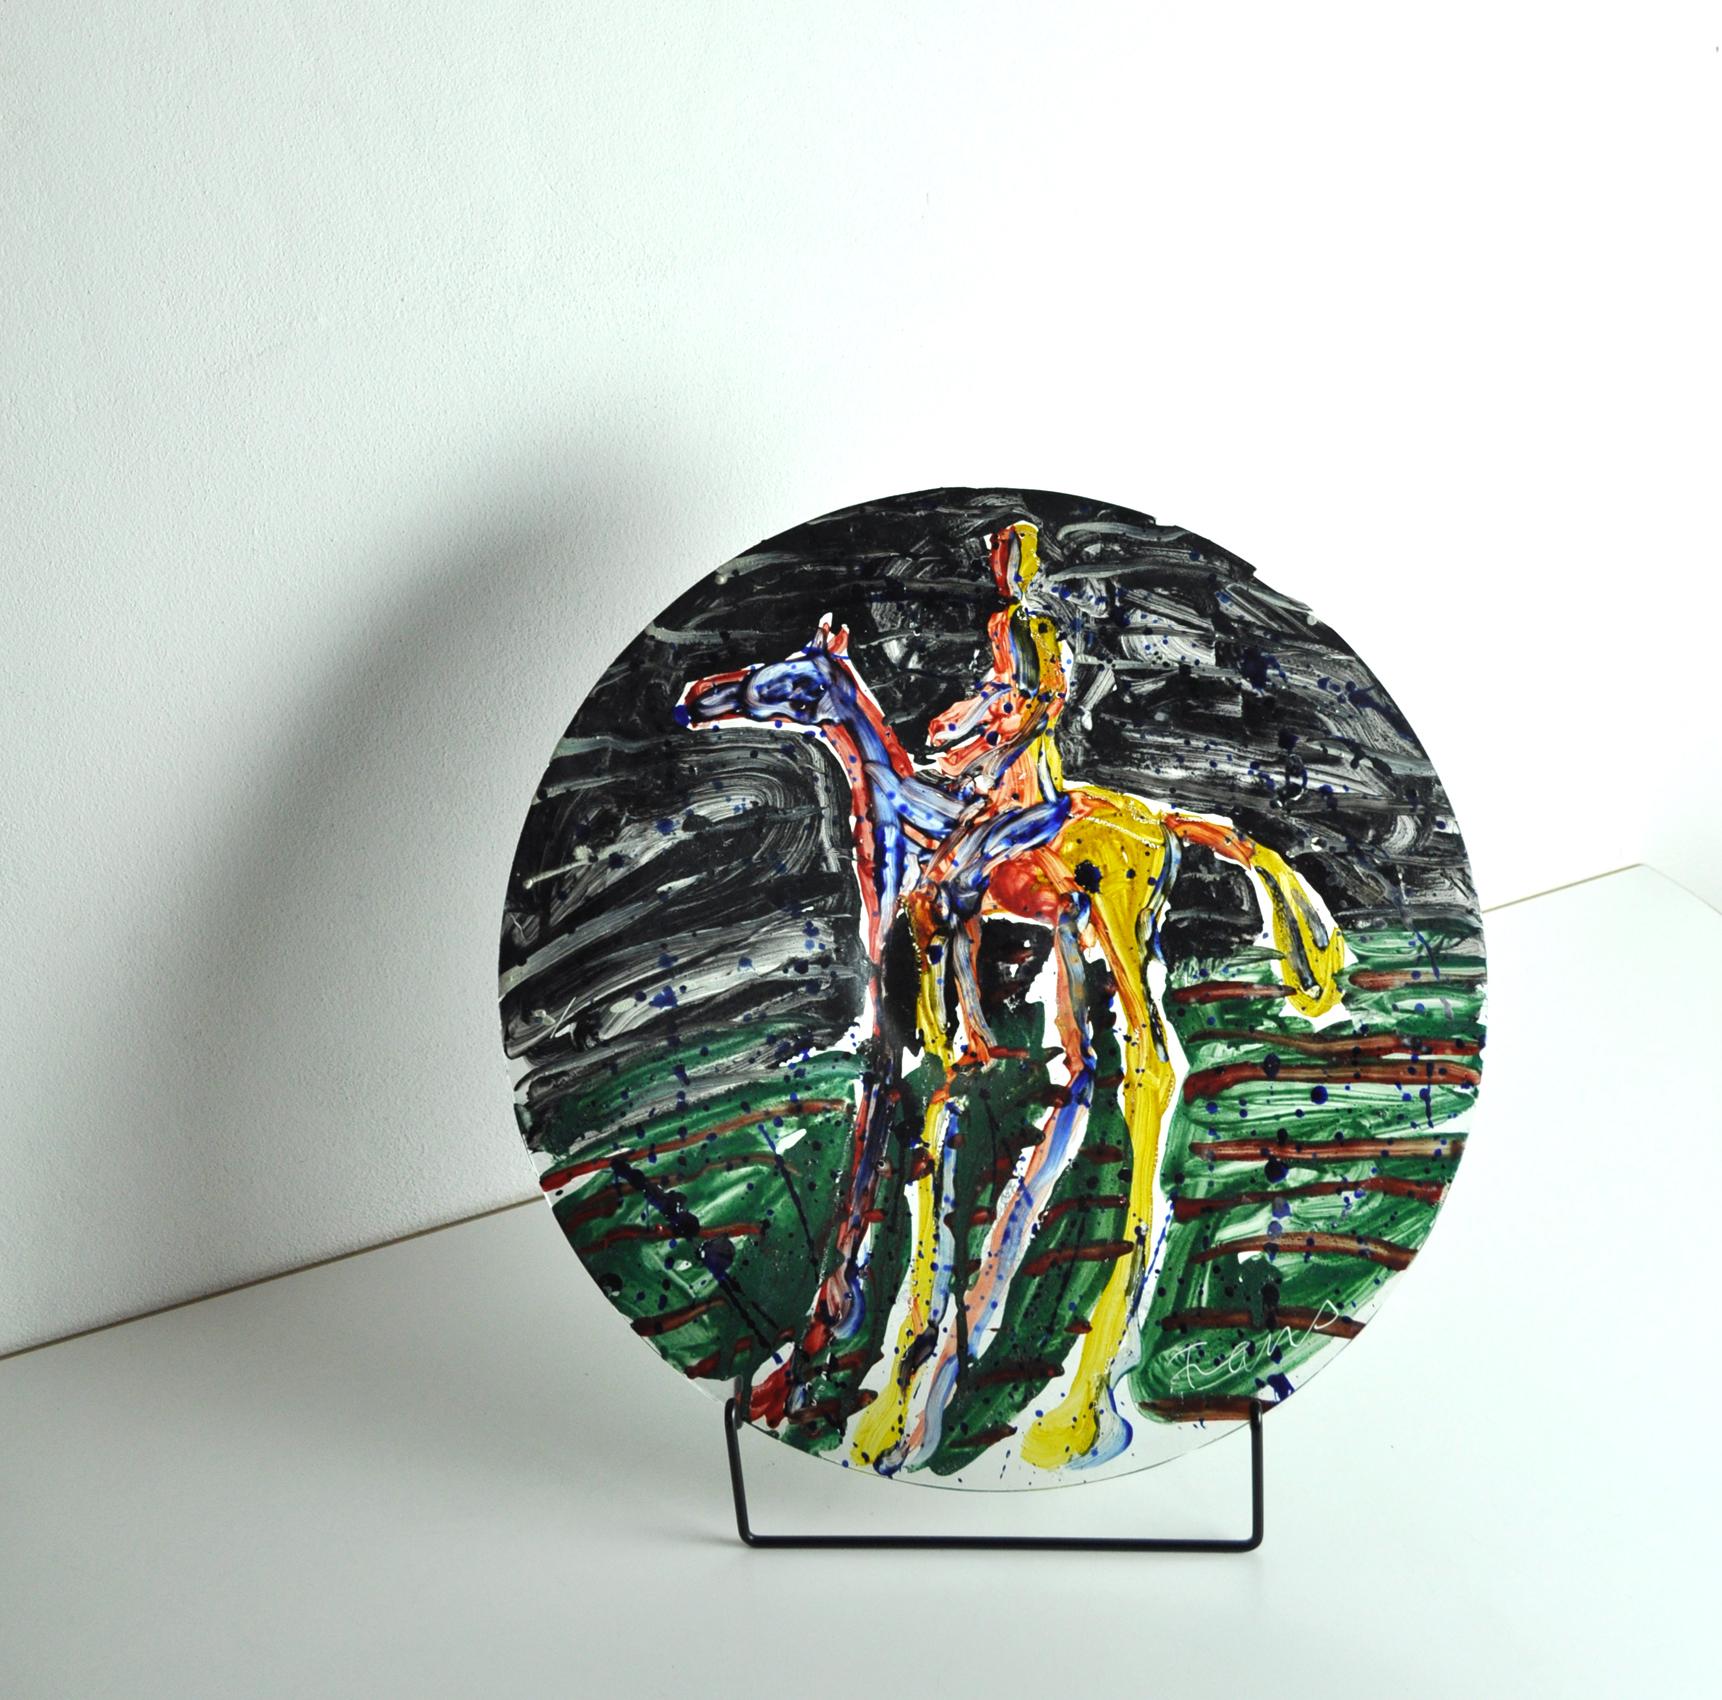 Painted Glass dish by Frans Widerberg. Rider performed with simple, powerful strokes and with strong lighting and color effects in his distinctive style and imagination. 

Diameter 45 cm x height 4 cm
Price including free shipping.

Frans Widerberg